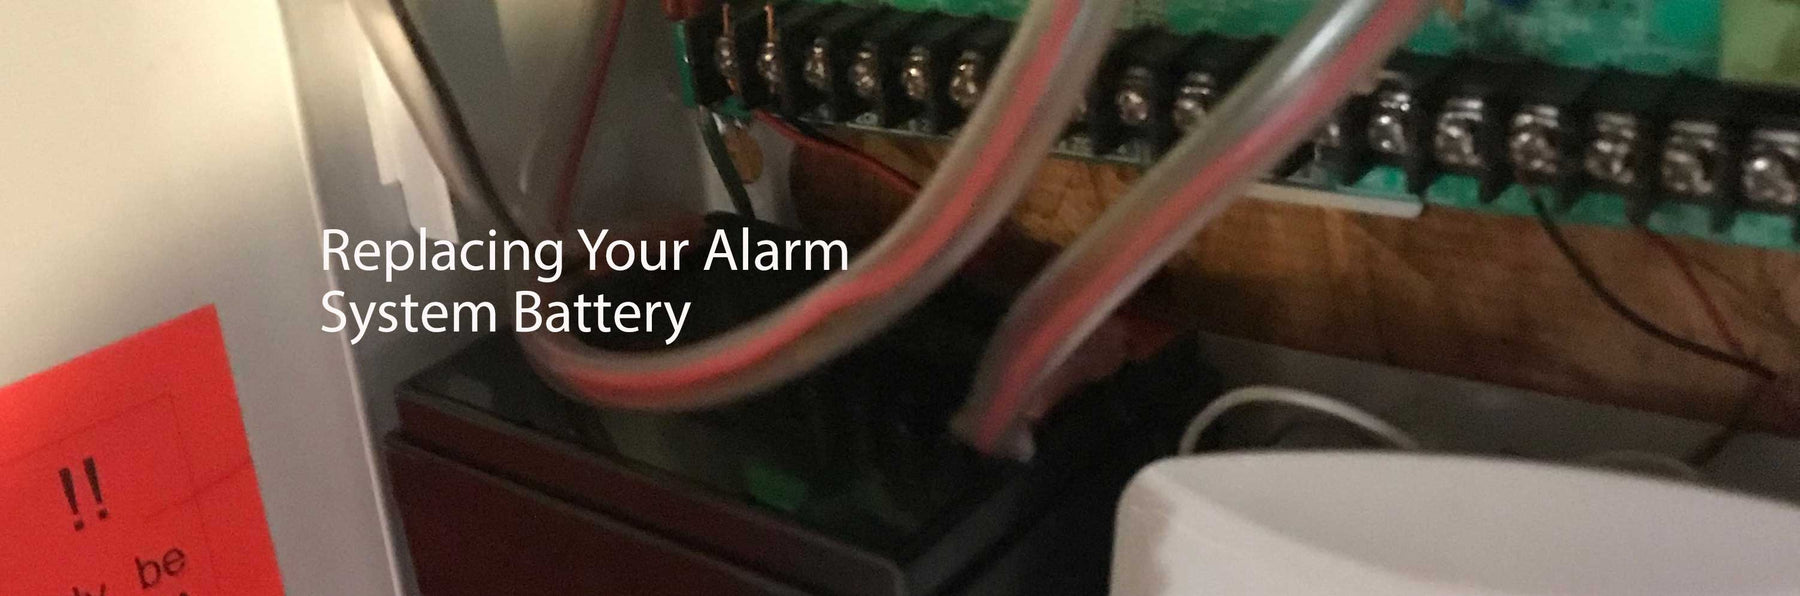 Replacing your Alarm System Battery